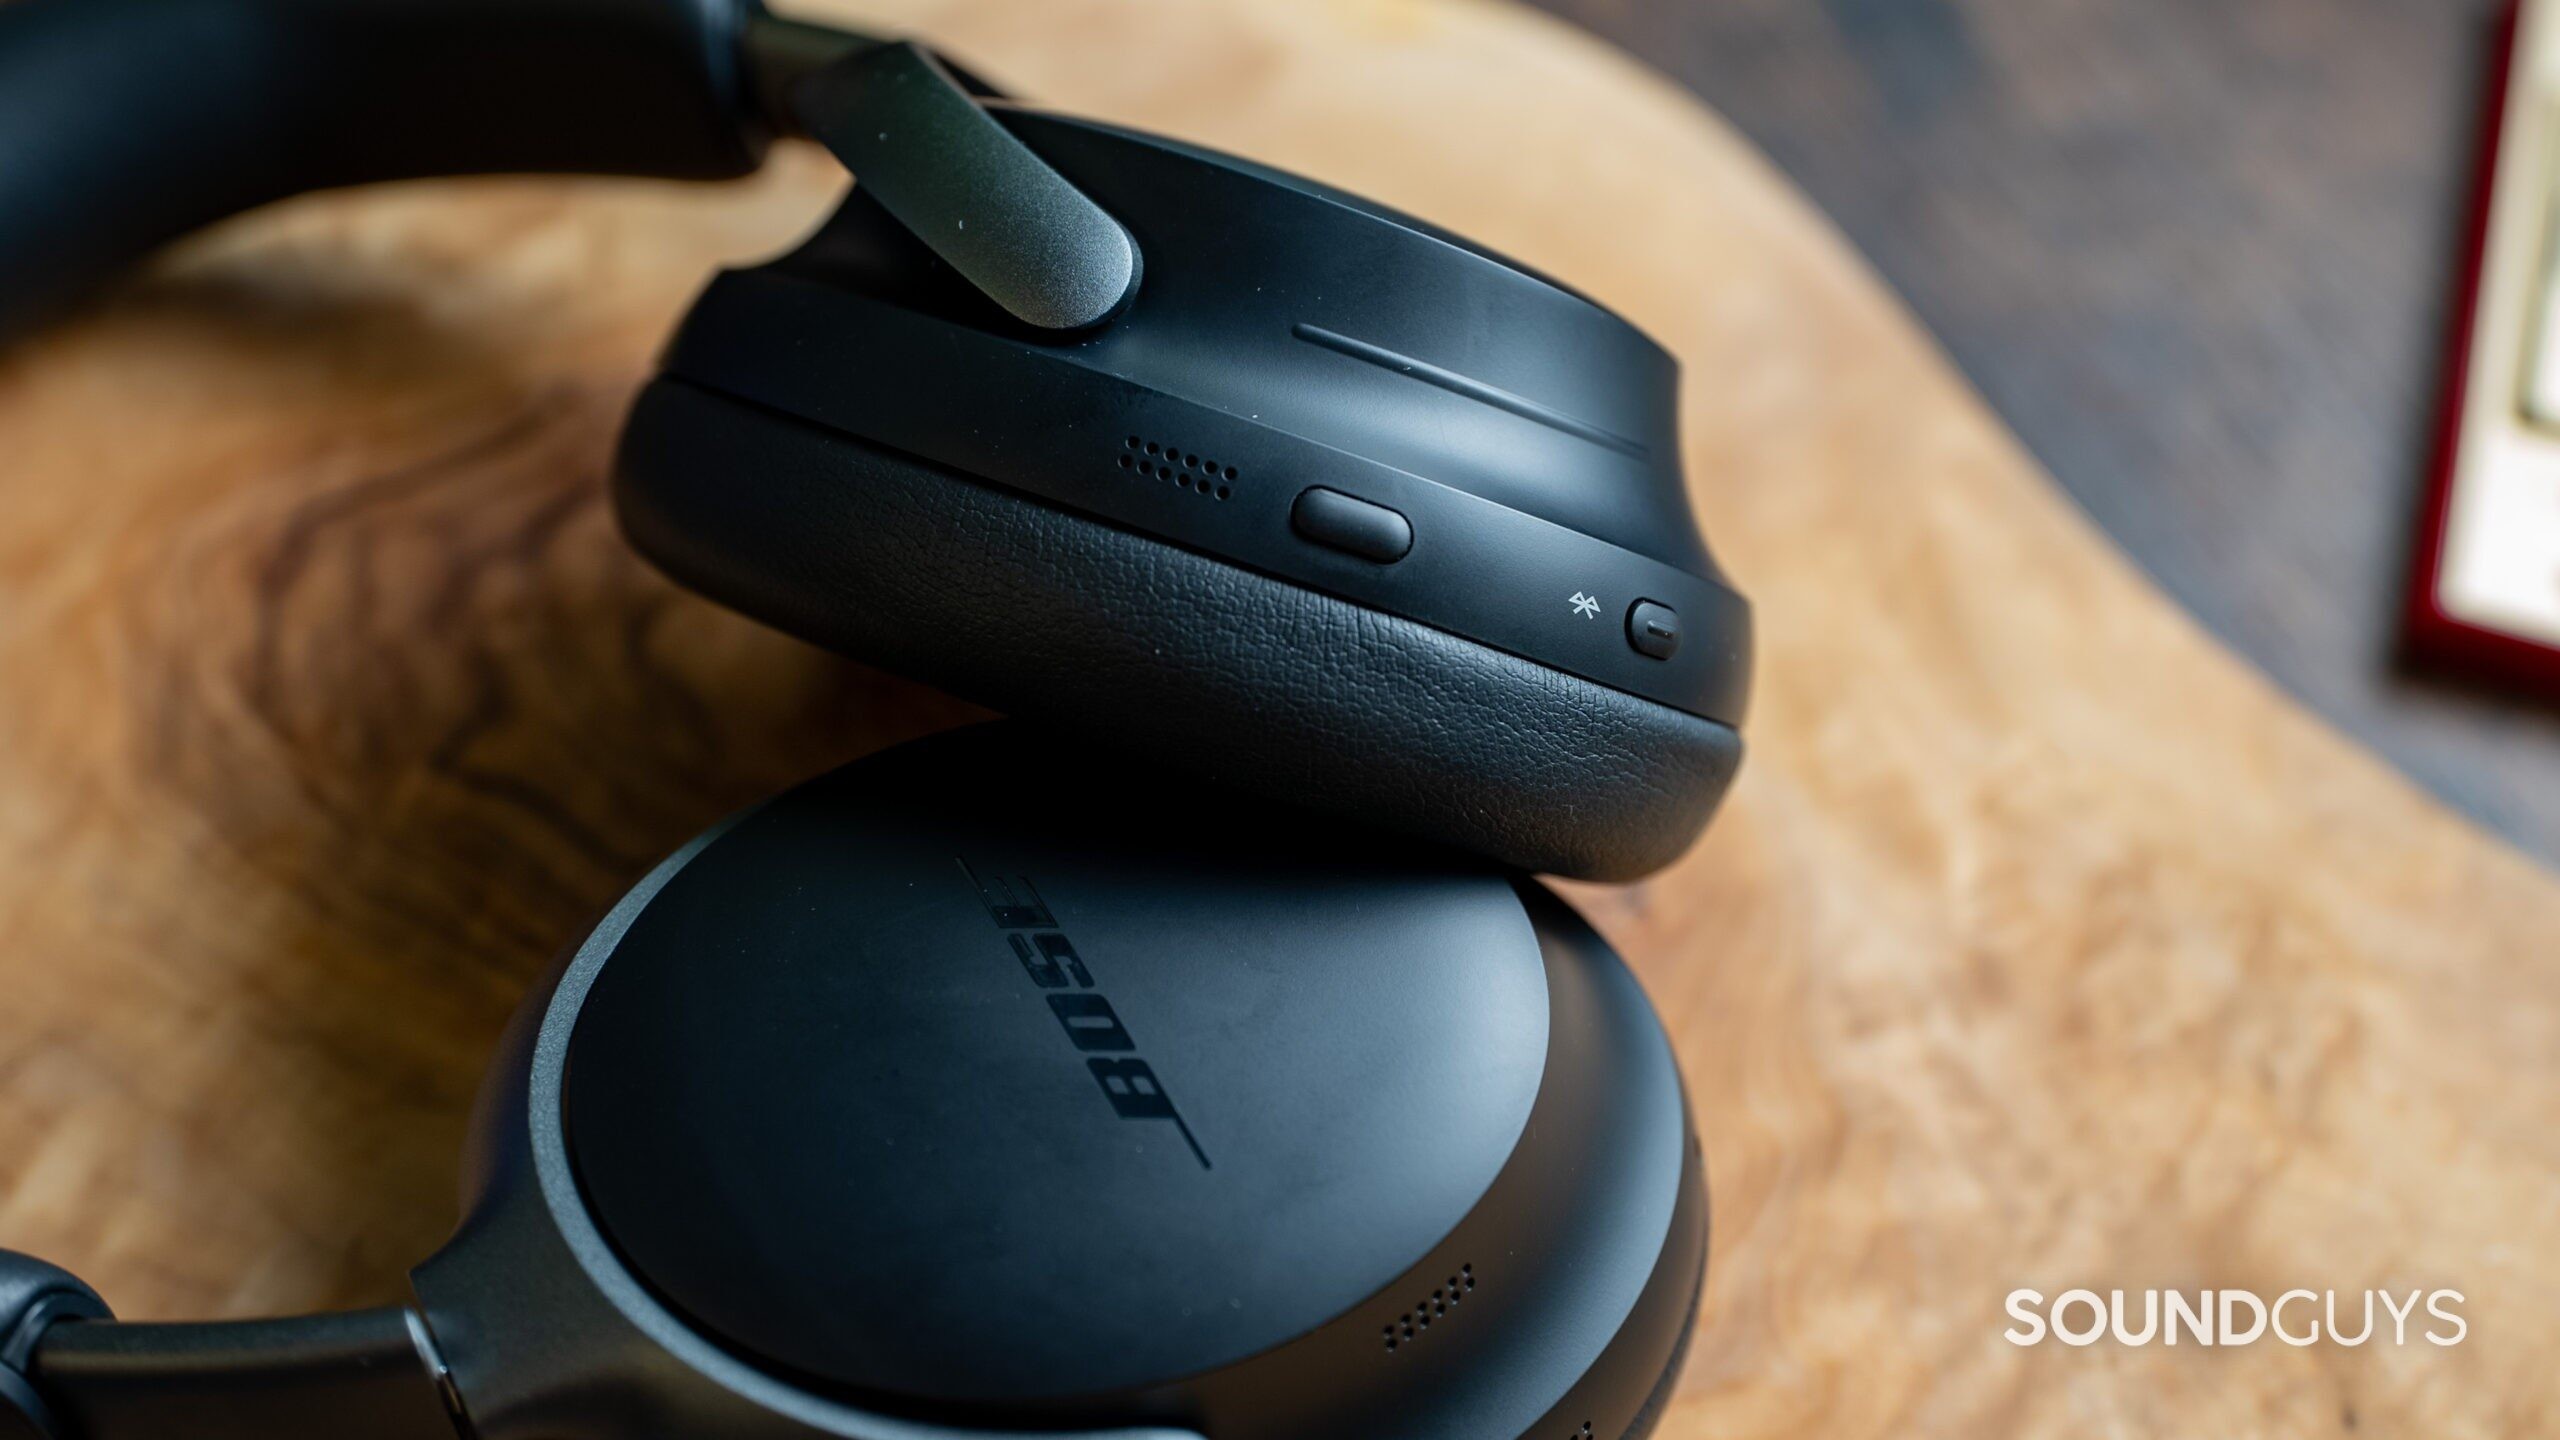 The Bose QuietComfort Ultra Headphones have only two buttons to control calls and playback.